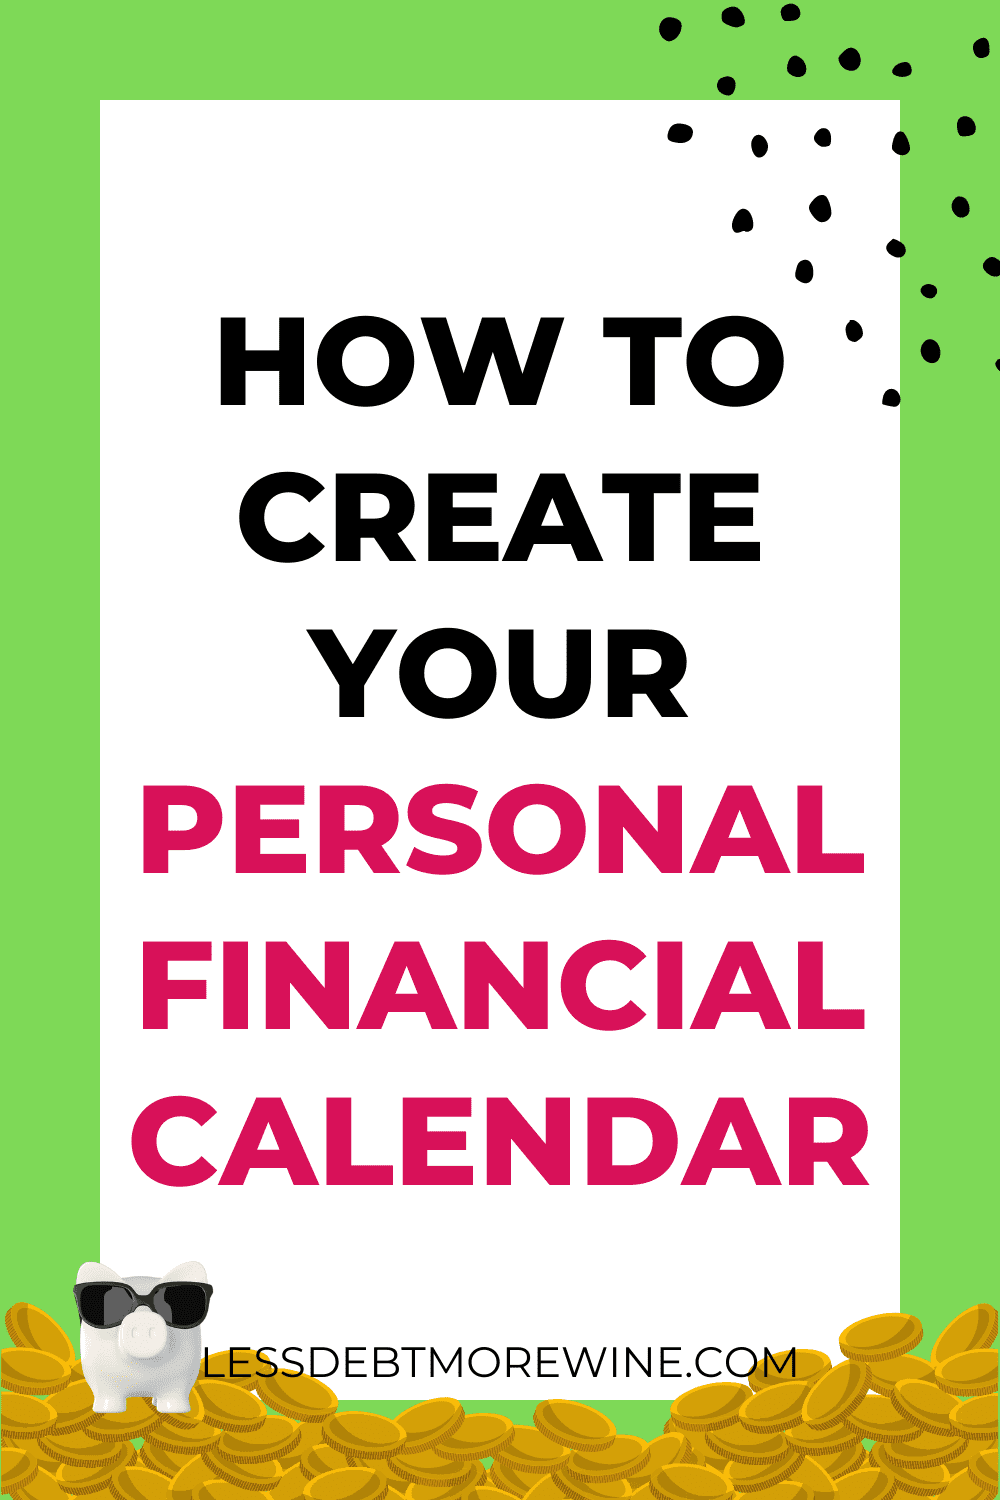 How to Create Your Personal Financial Calendar